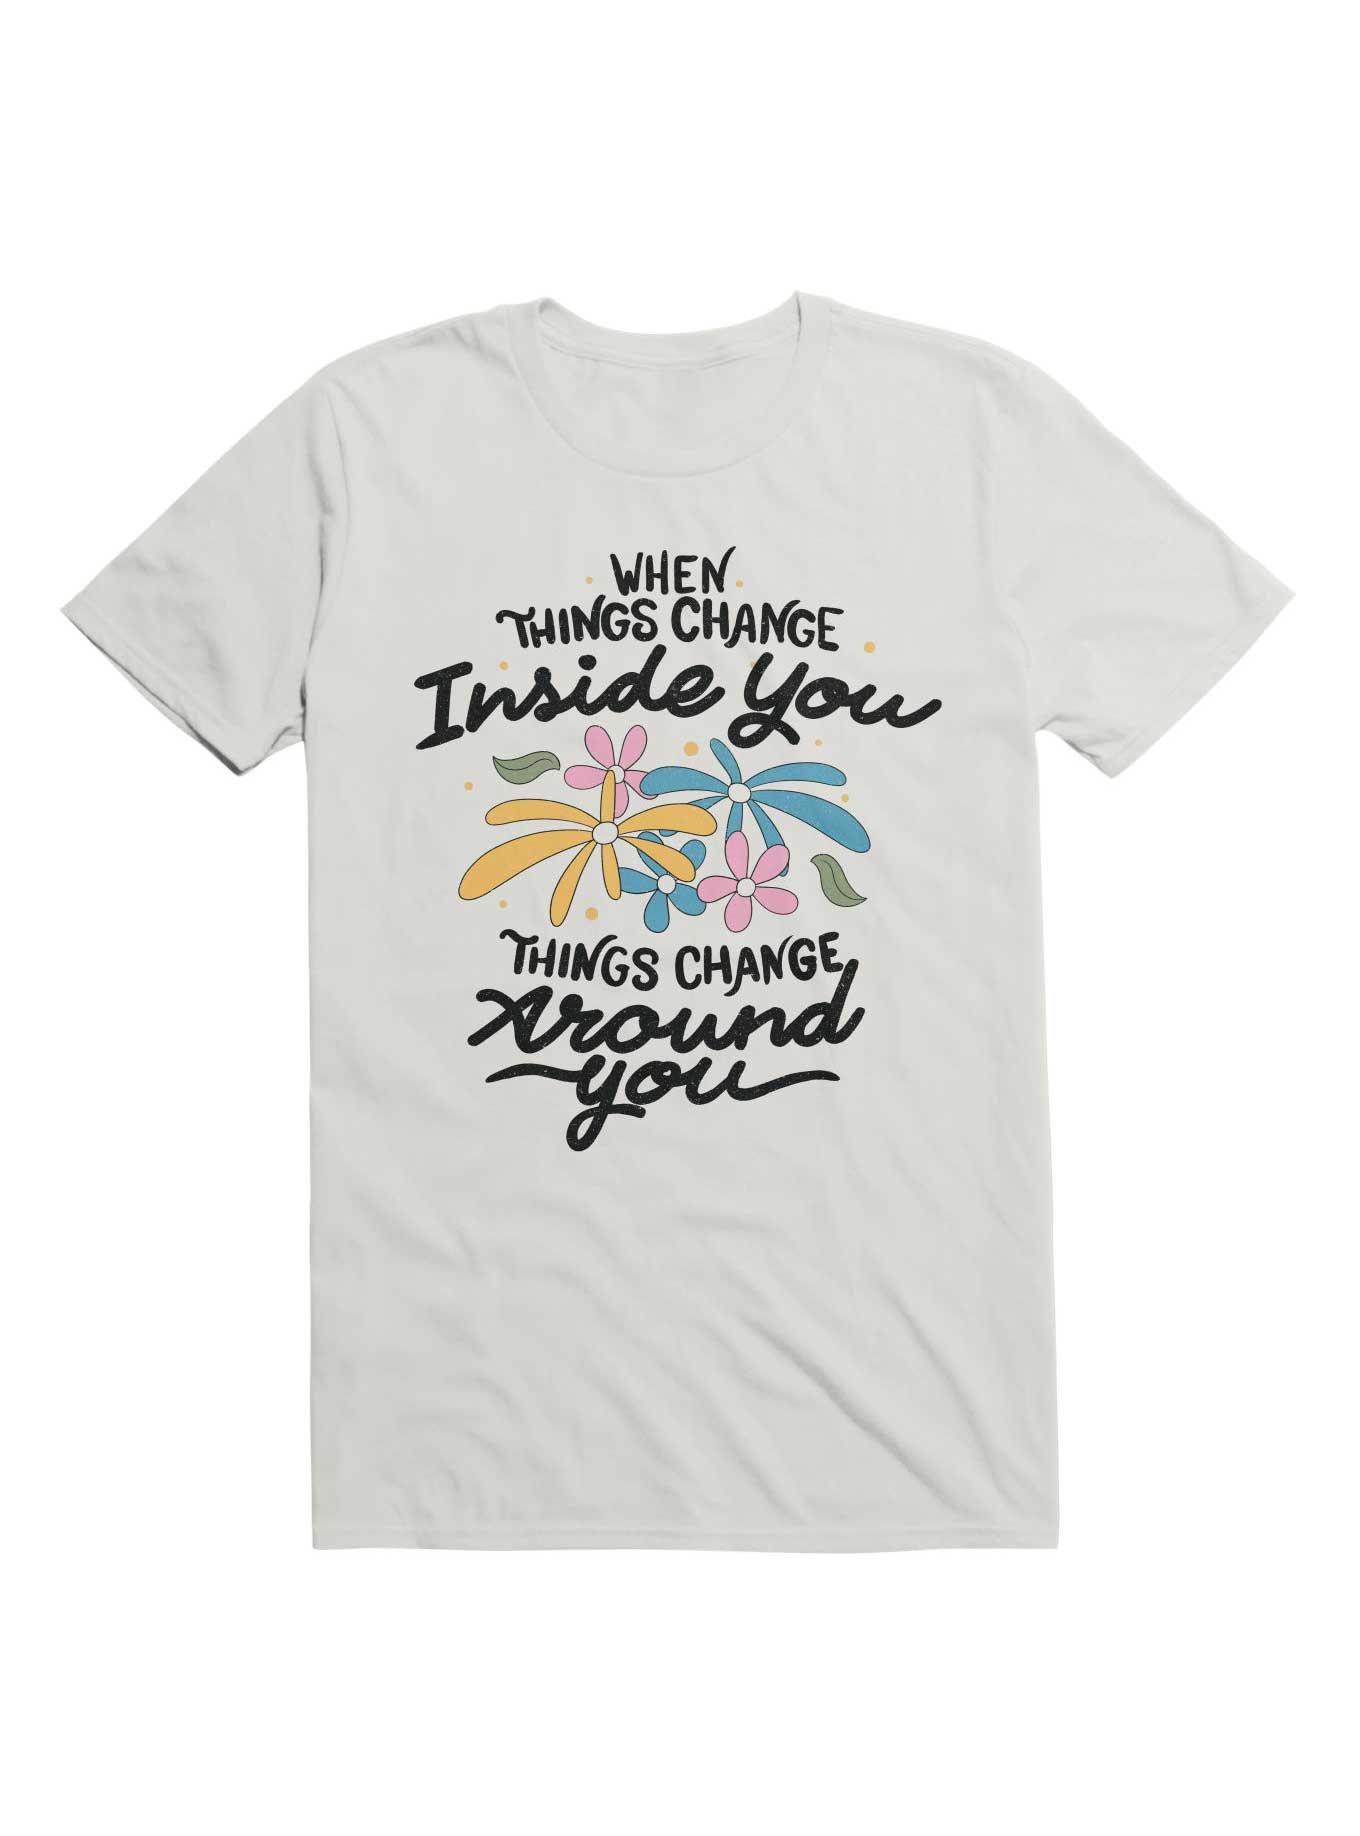 When Things Change Inside You, Things Change Around You T-Shirt, WHITE, hi-res